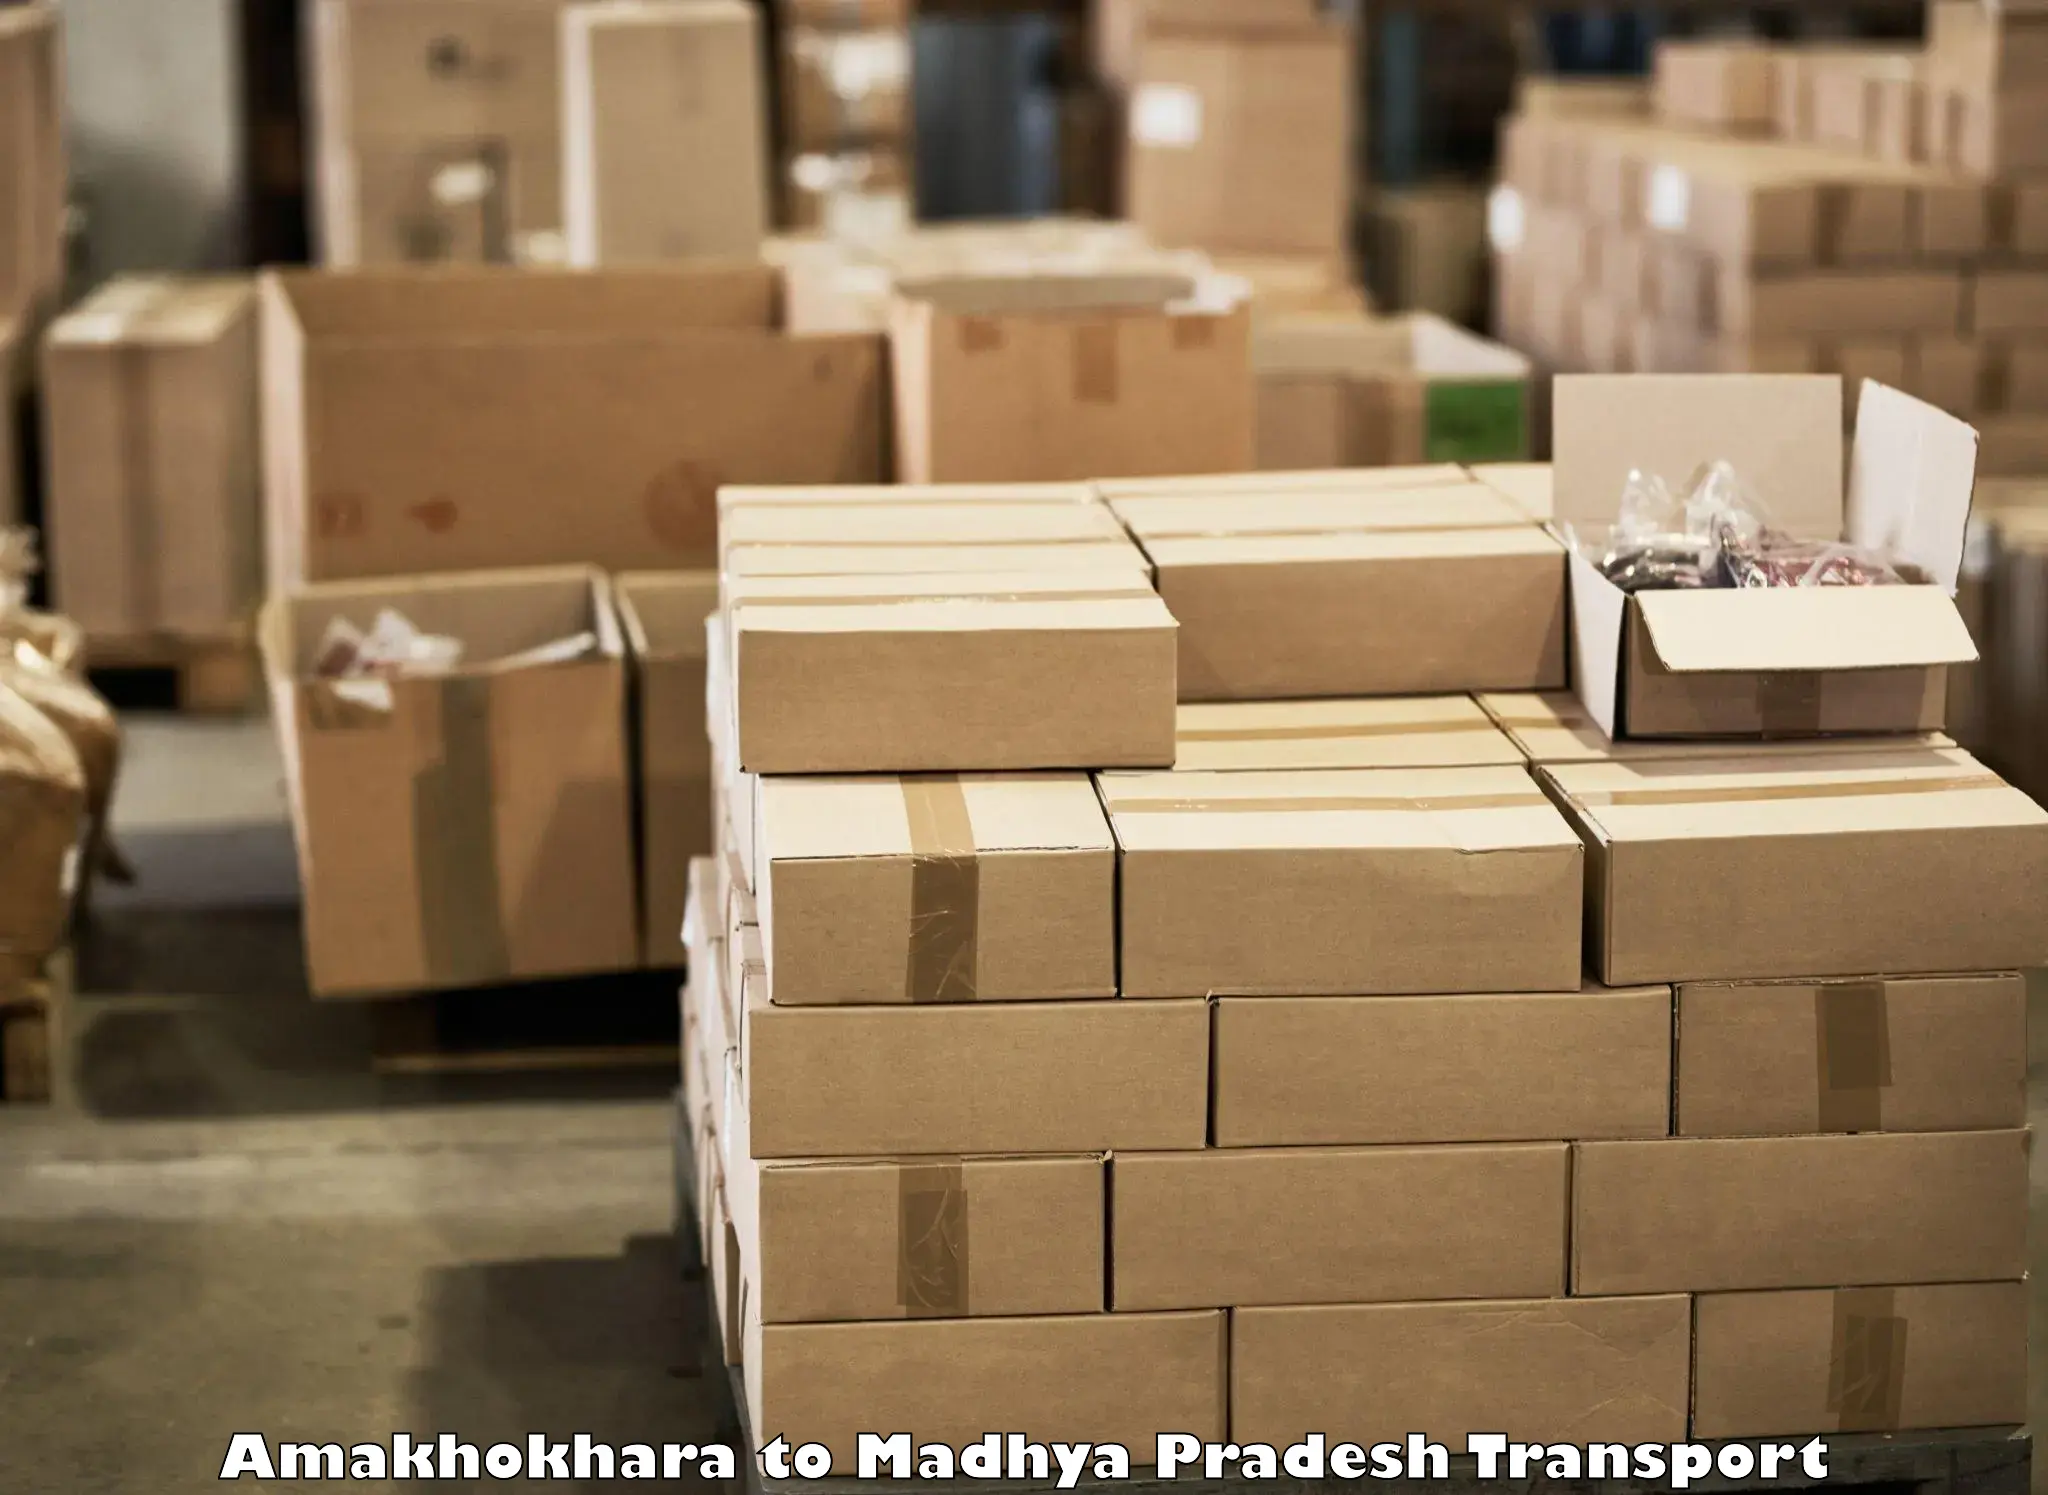 Daily parcel service transport Amakhokhara to Indore